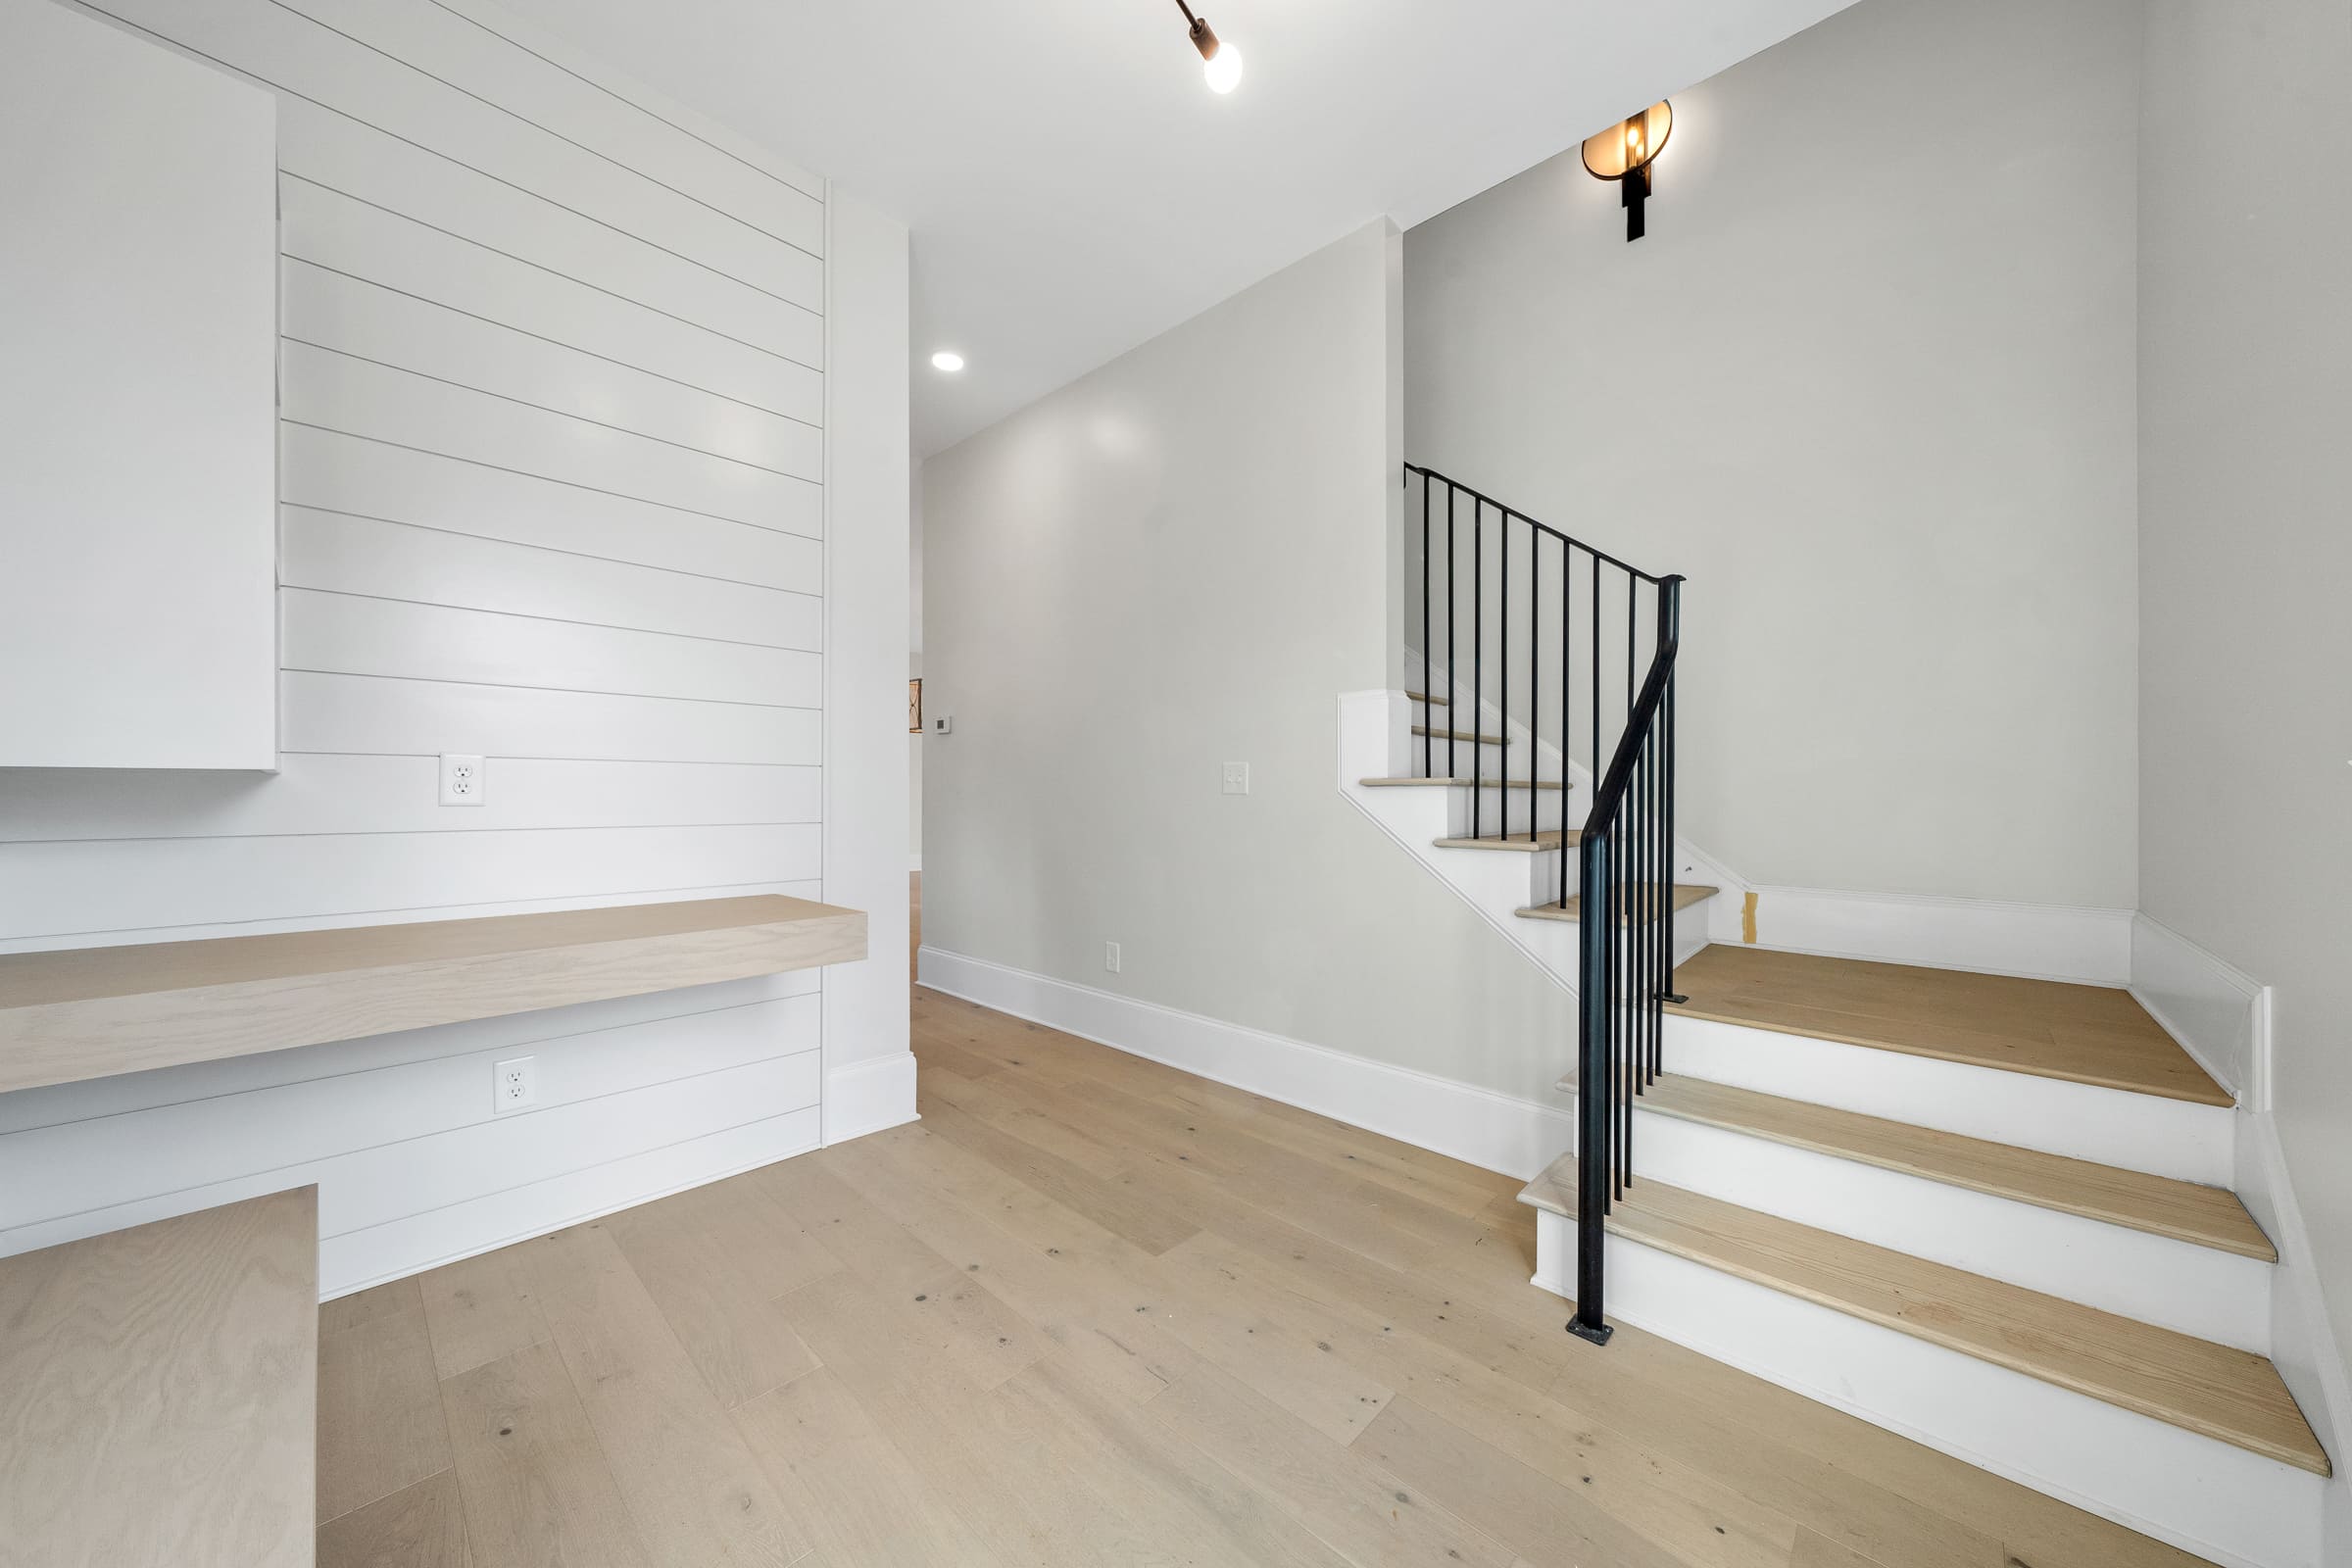 Stunning White and Open Entrance with Light Wood Flooring and Black Staircase Banaster |PAXISgroup